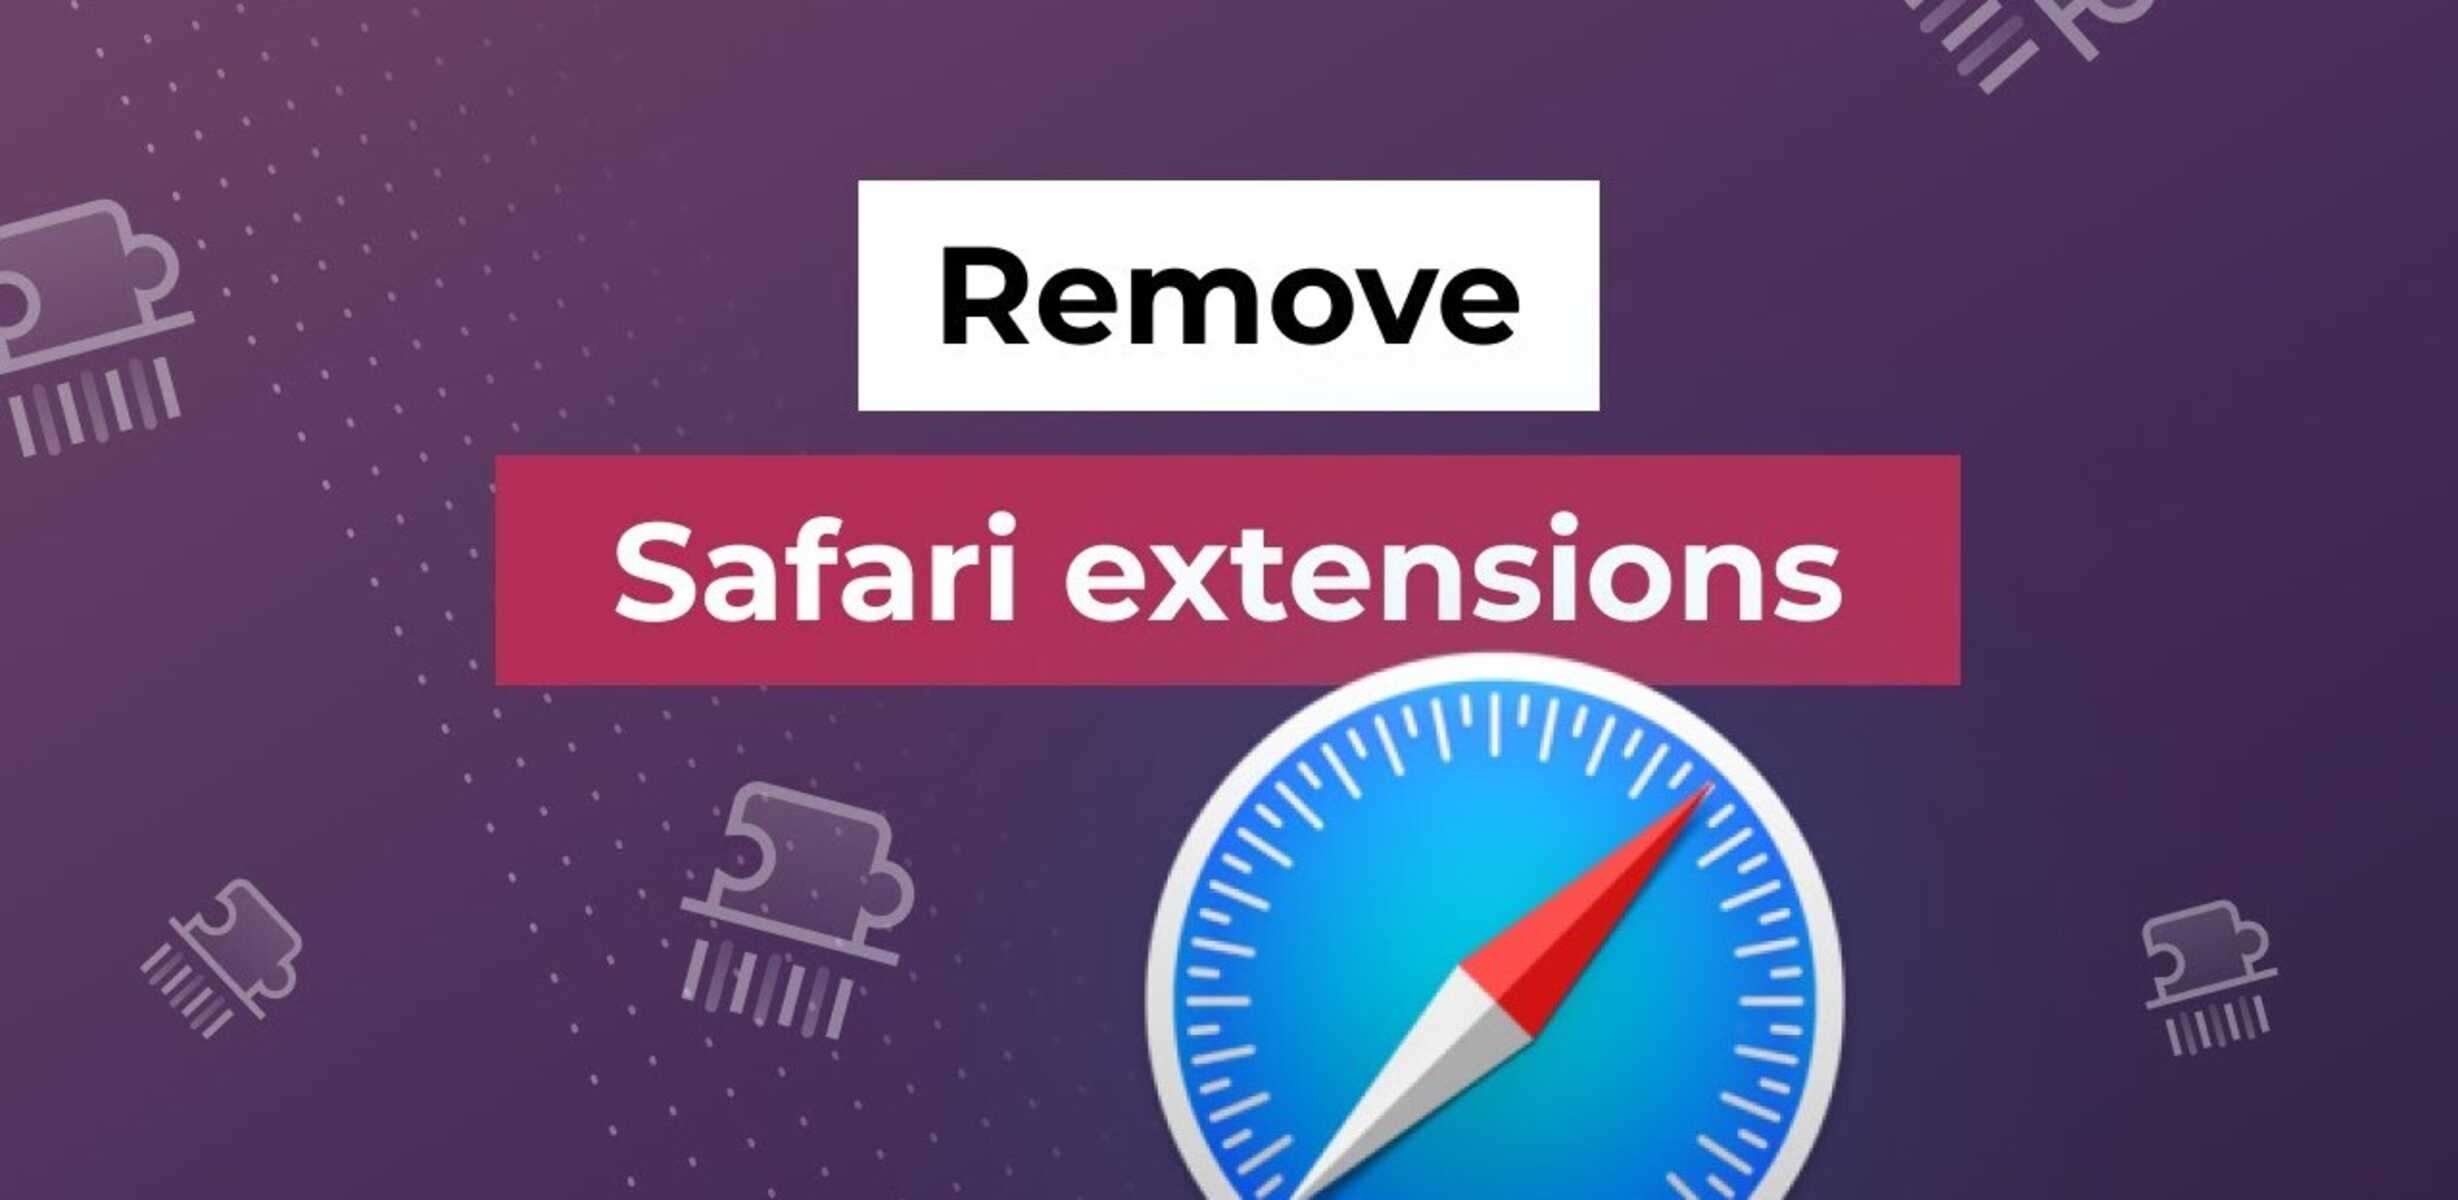 How To Remove Extensions On Safari